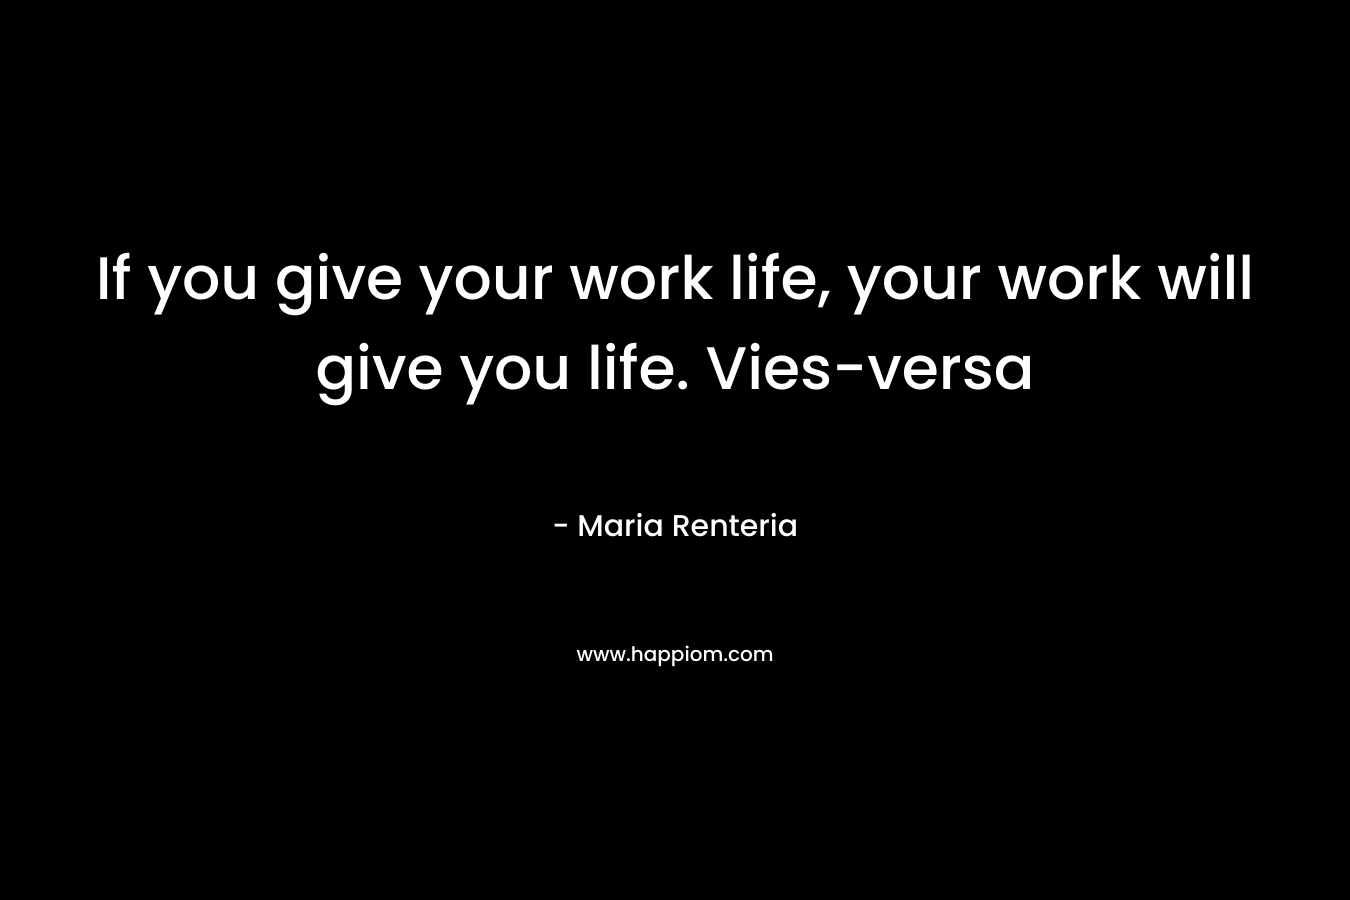 If you give your work life, your work will give you life. Vies-versa